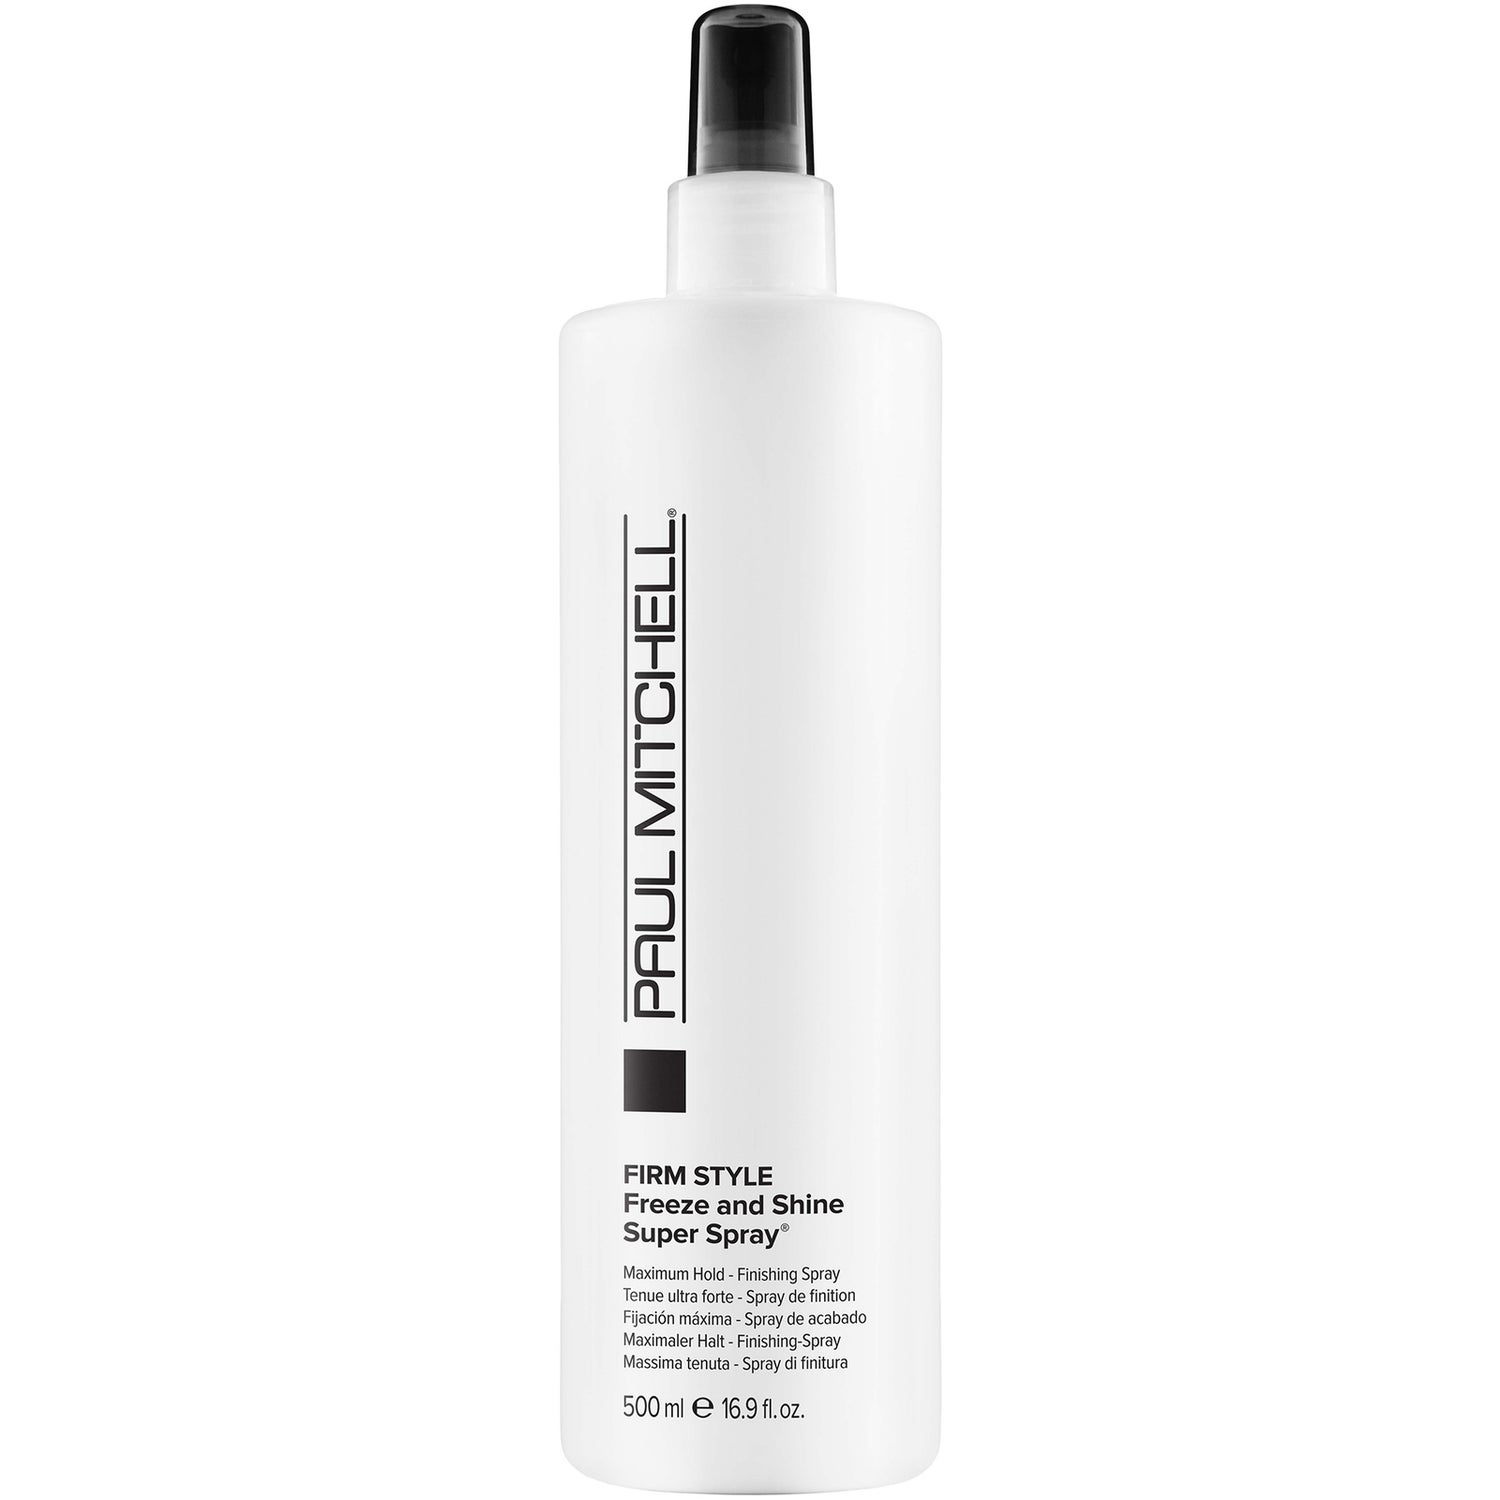 Paul Mitchell Firm Style Freeze And Shine Super Spray (500 ml)